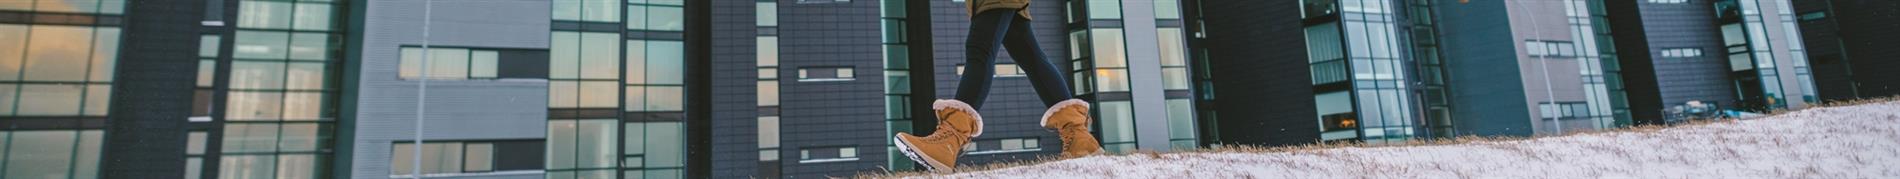 The North Face Warm Women's Winter Boots for Style and Comfort 